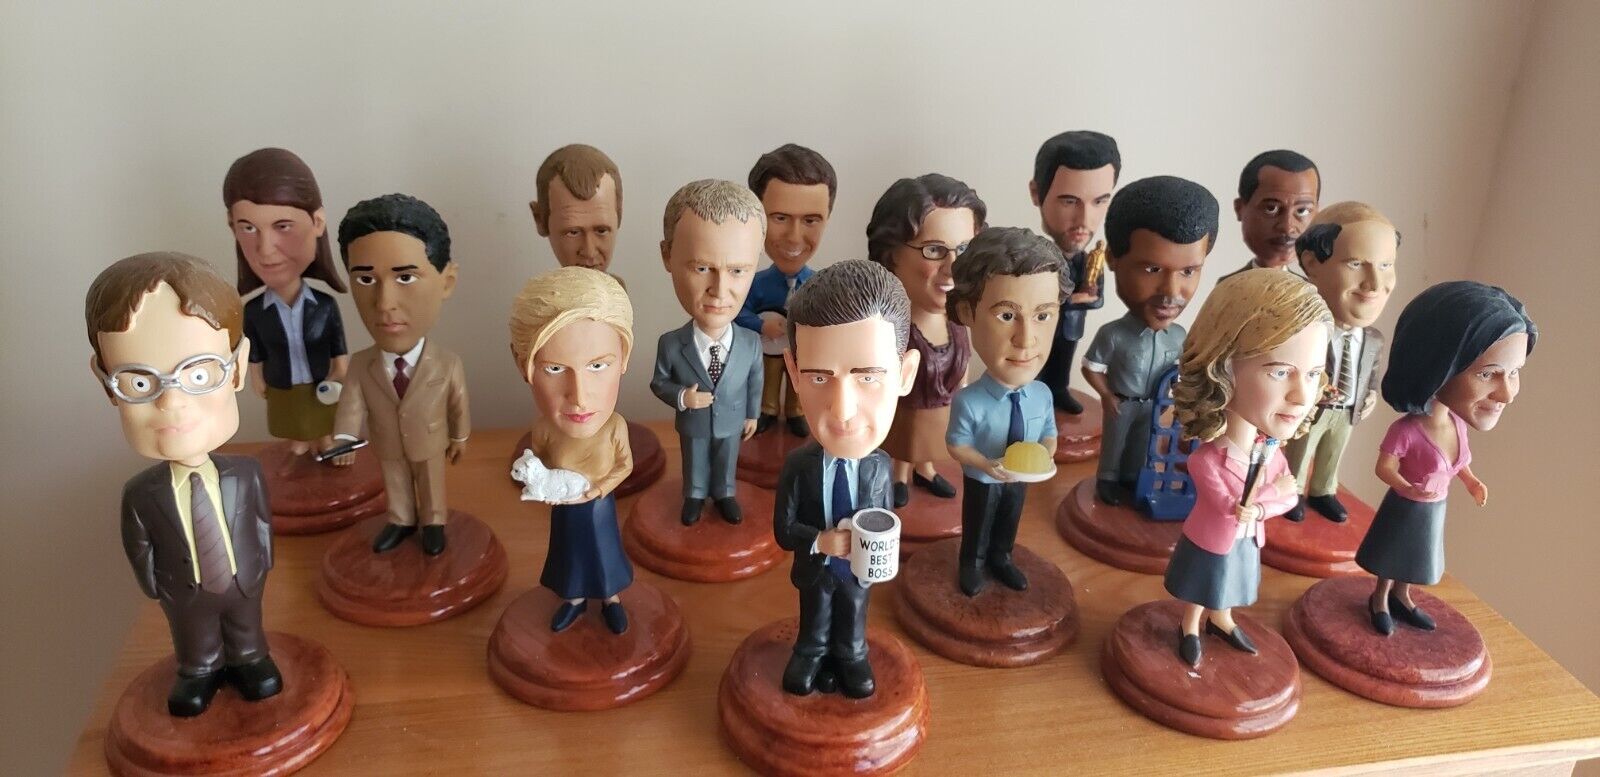 The Office Bobbleheads full 16 pc Collection in original boxes. 